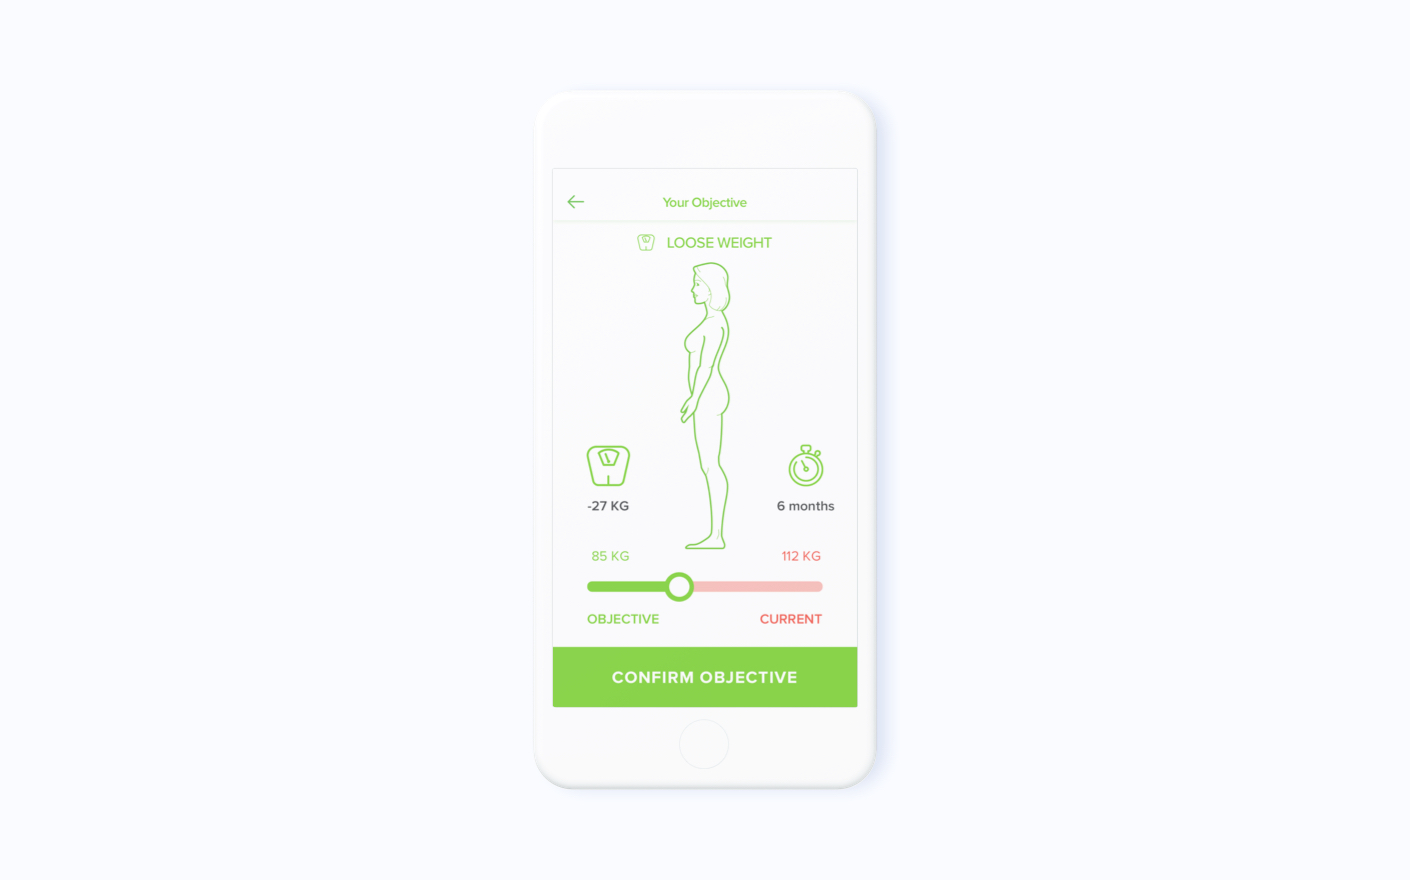 User interface of Herbalife Go - a meal planning app